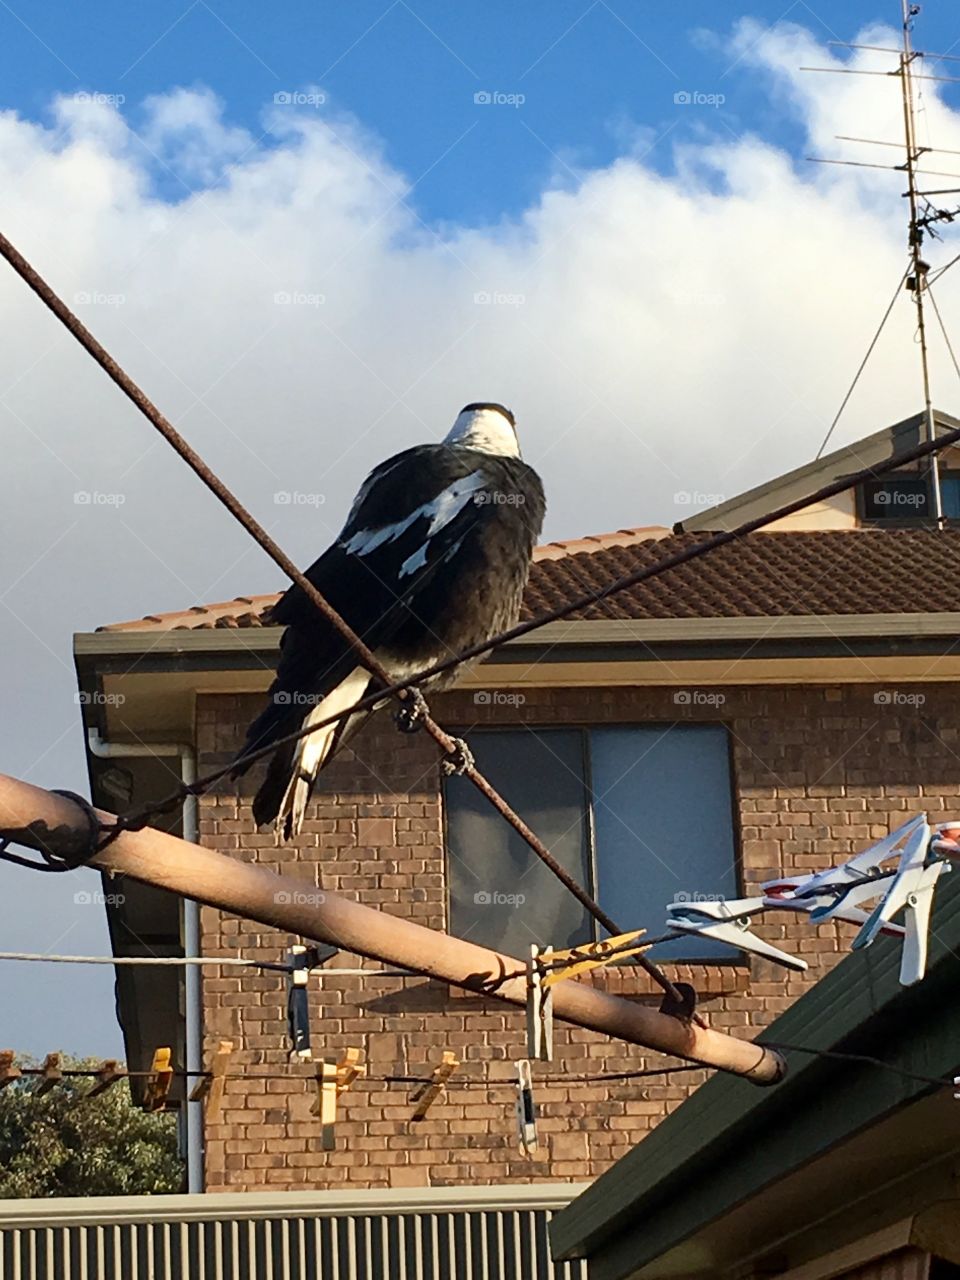 Magpie perched on outdoor clothesline, creatures ruffled, house roof background